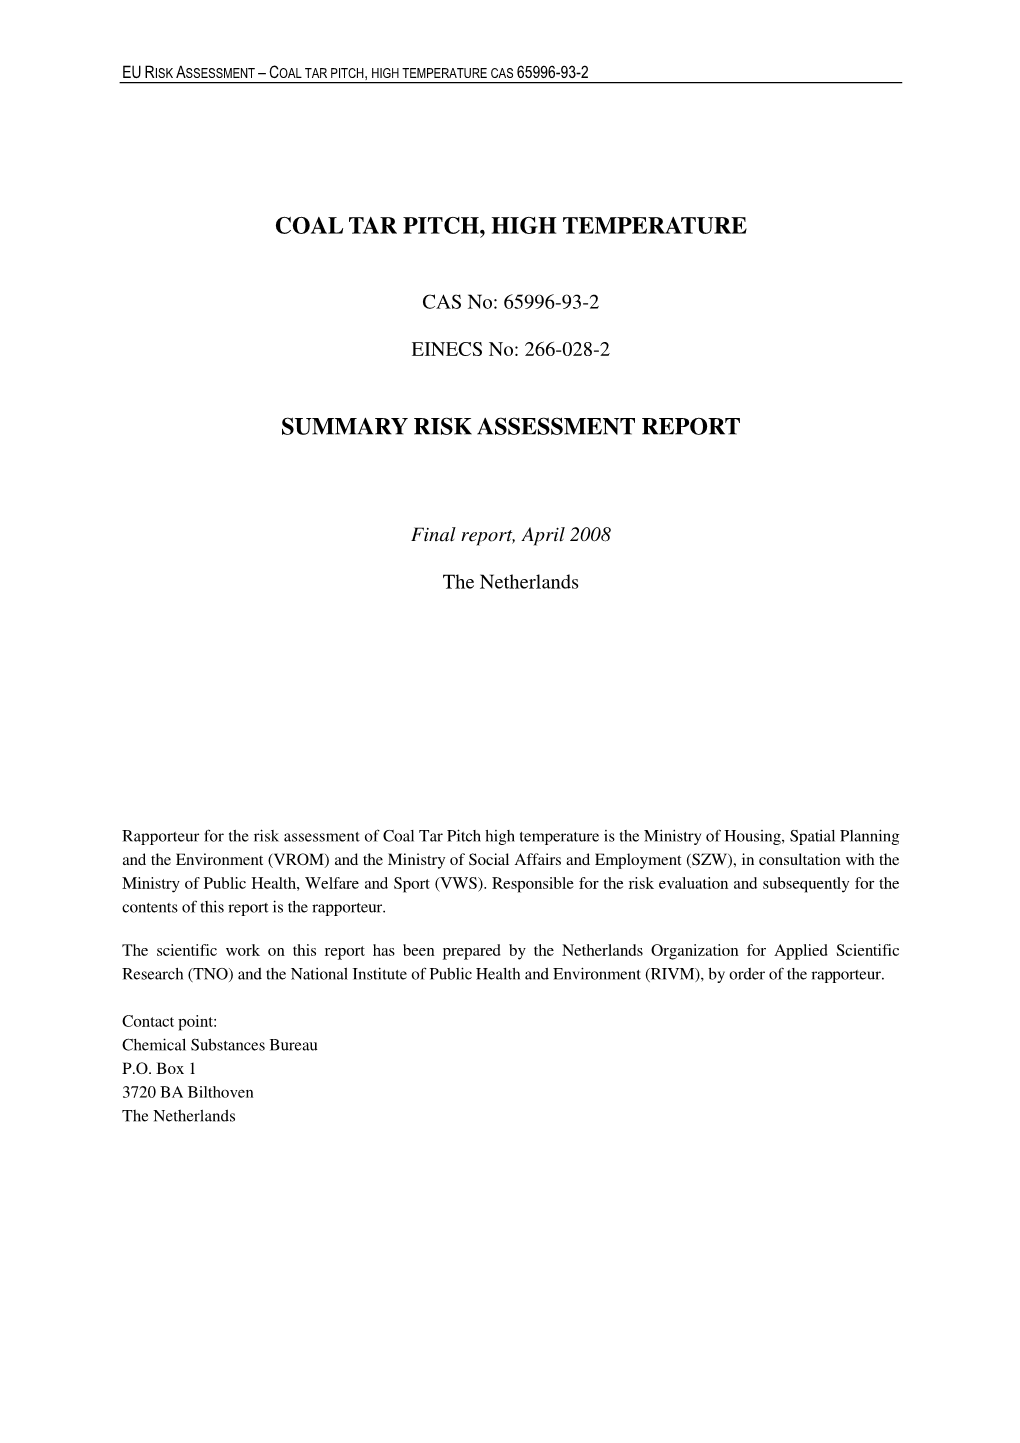 Coal Tar Pitch, High Temperature Summary Risk Assessment Report